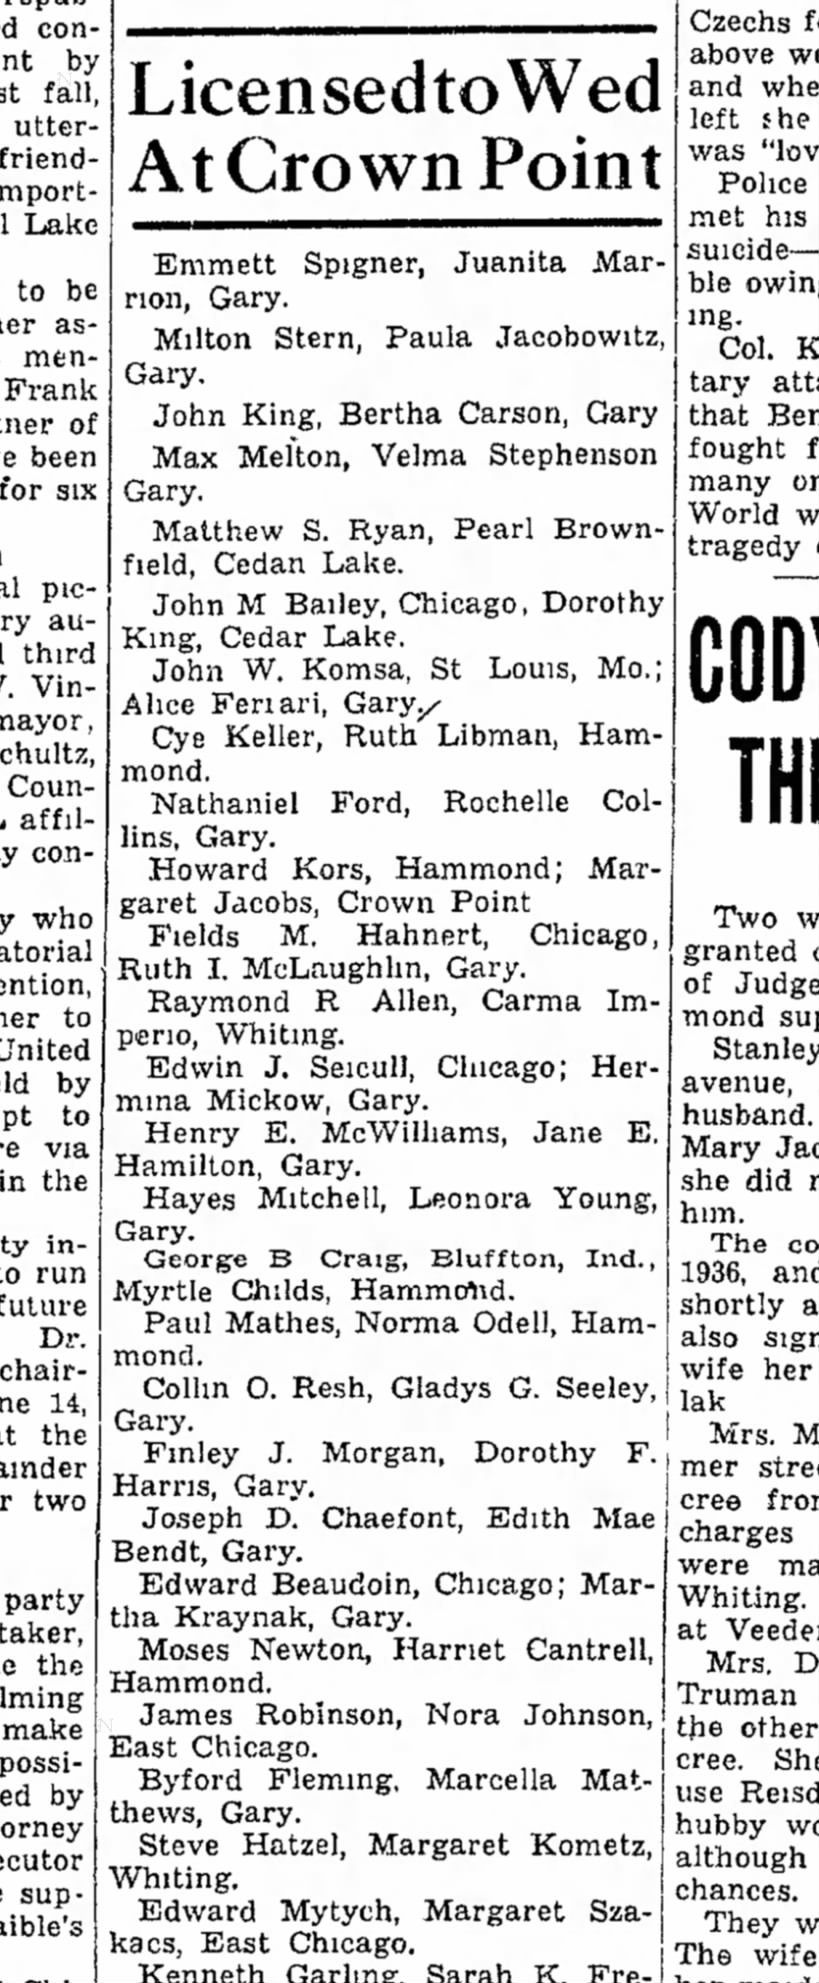 Margaret Szakacs licensed to wed Edward Mytych- The Times (Hammond, Indiana) June 25, 1939